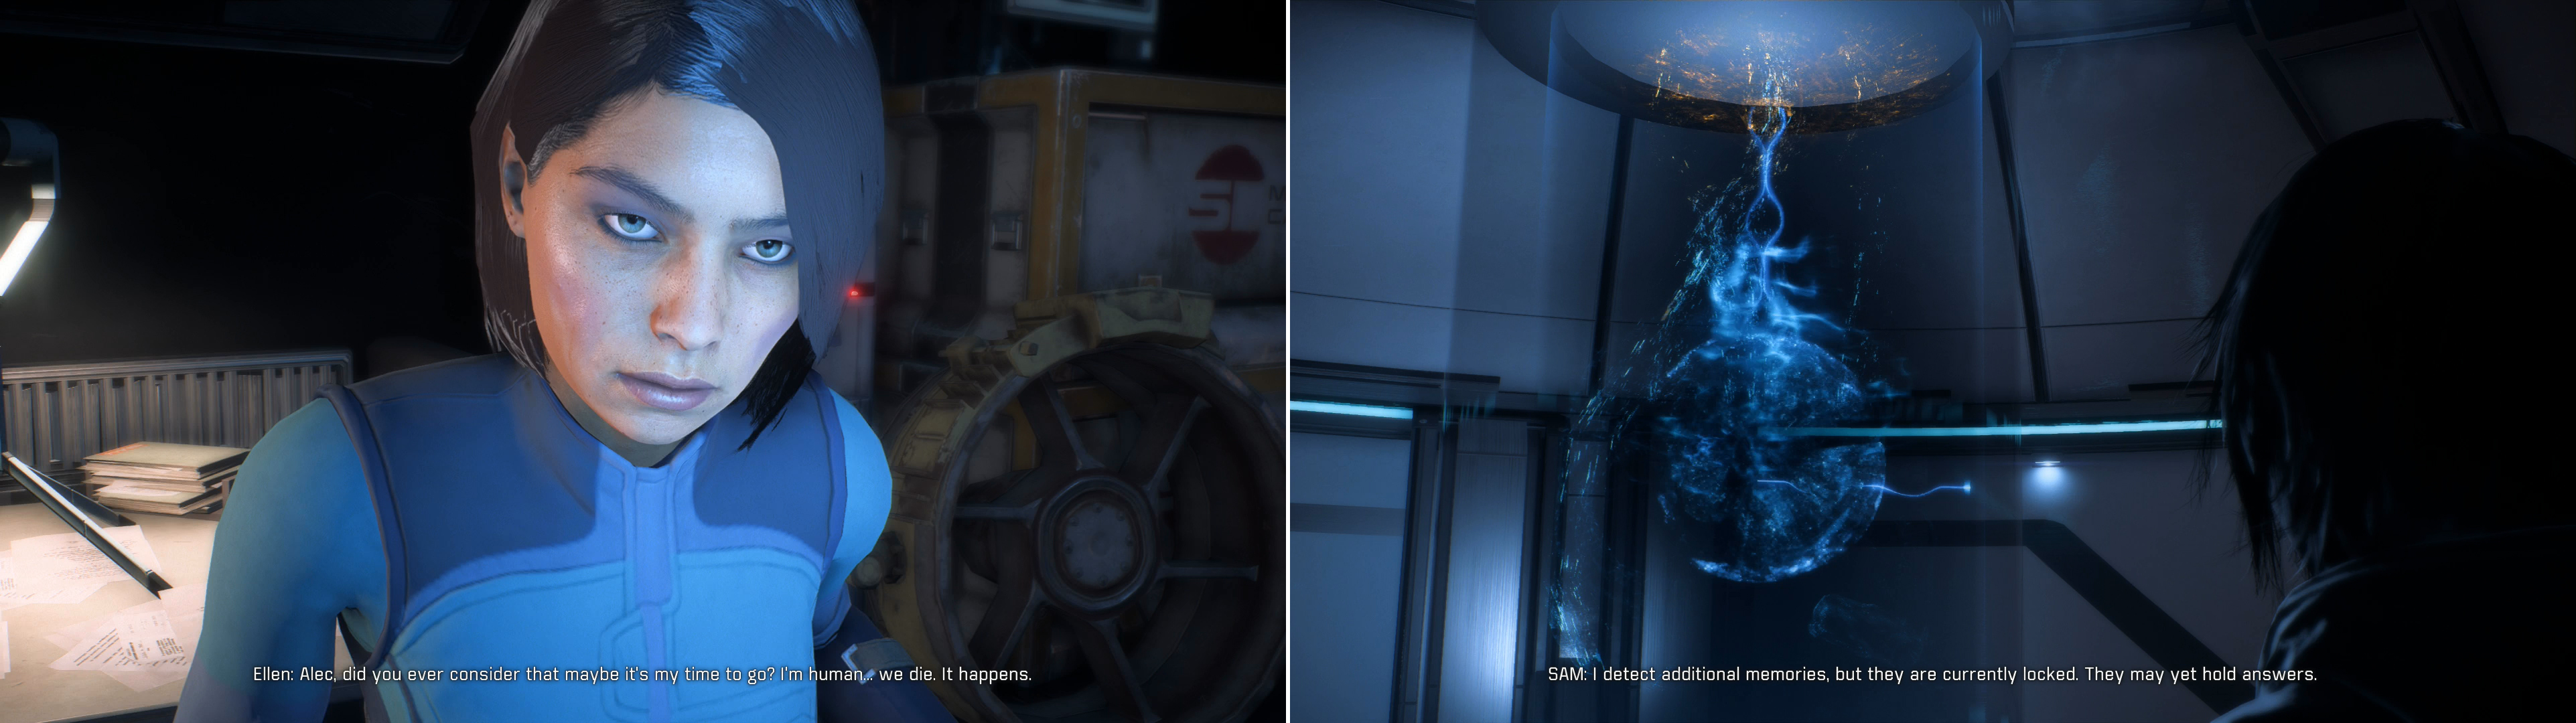 Interact with the Memory Triggers on Eos to unlock a memory, which you can view by visiting the SAM Node on the Hyperion (left). Afterwards, SAM will encourage you to continue the quest by finding more Memory Triggers on other planets (right).